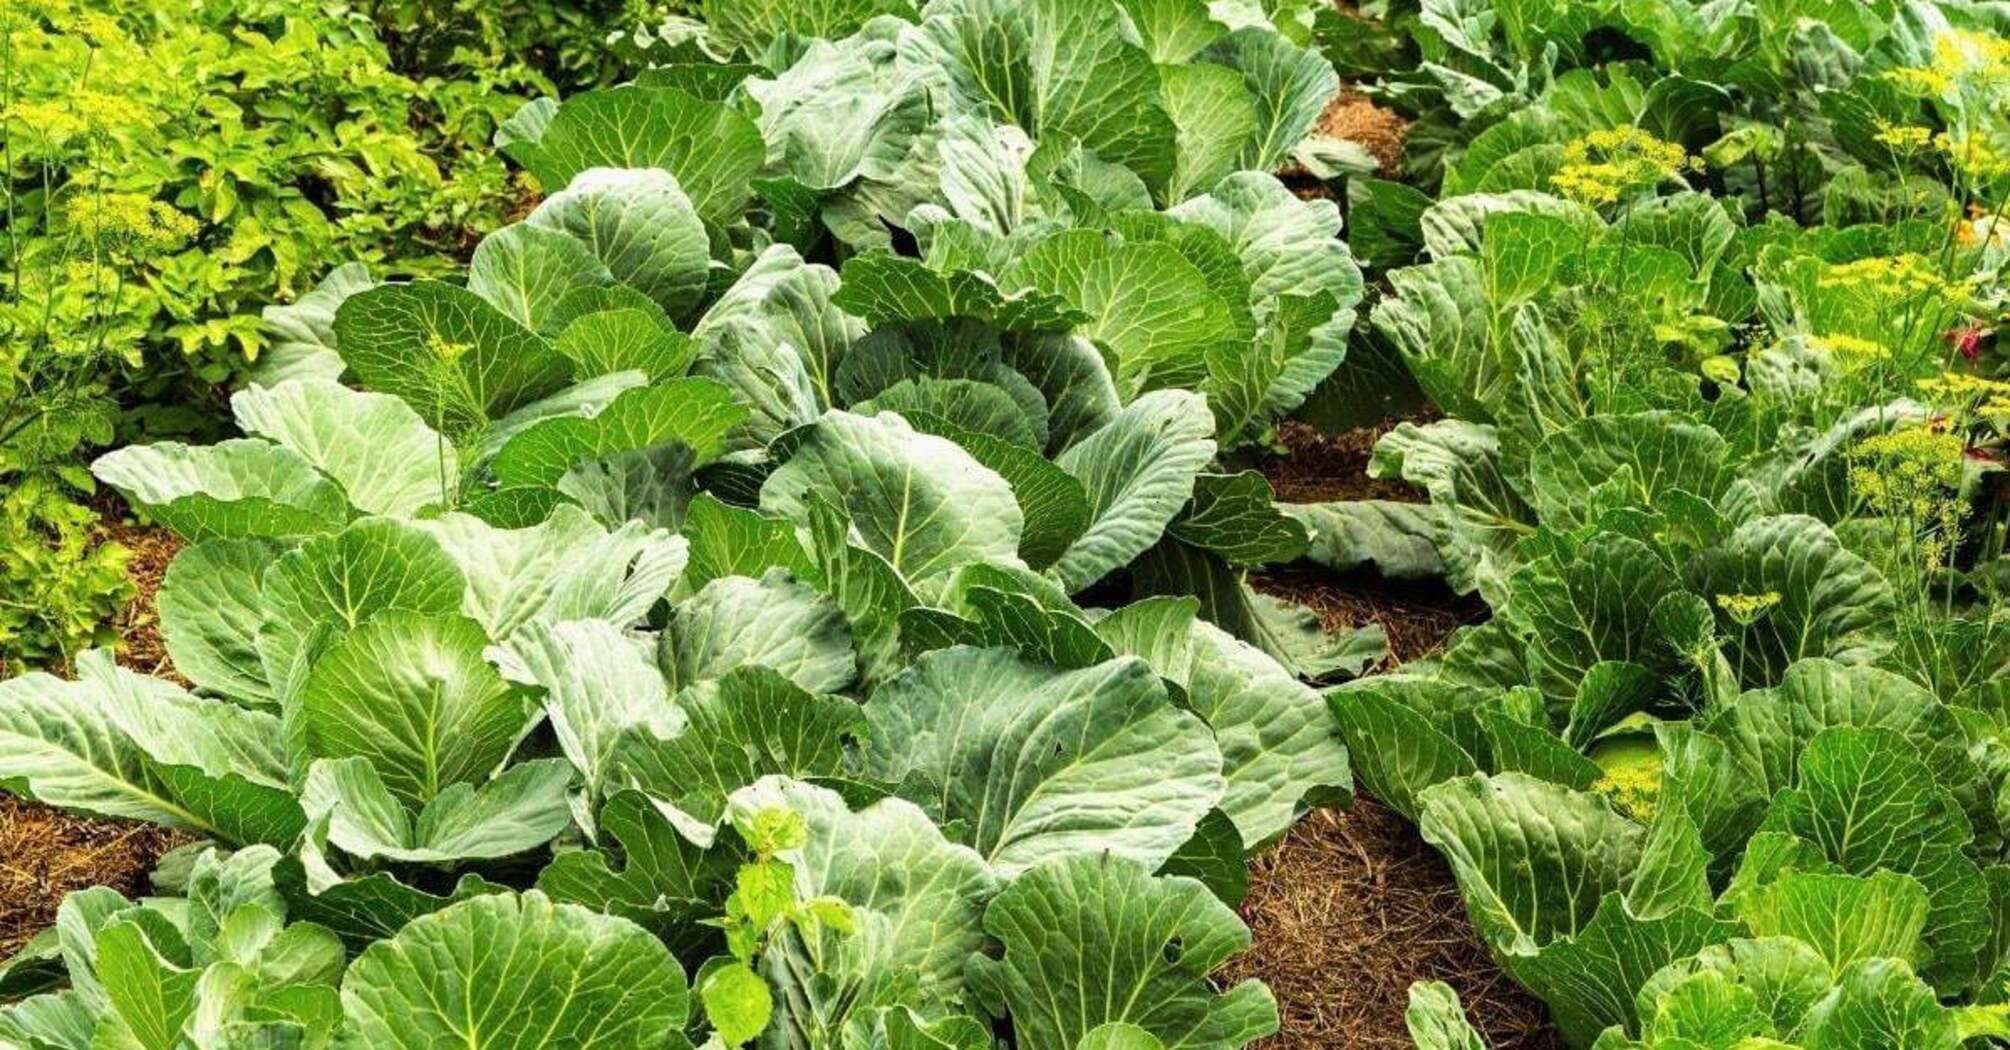 After which plants should not plant cabbage